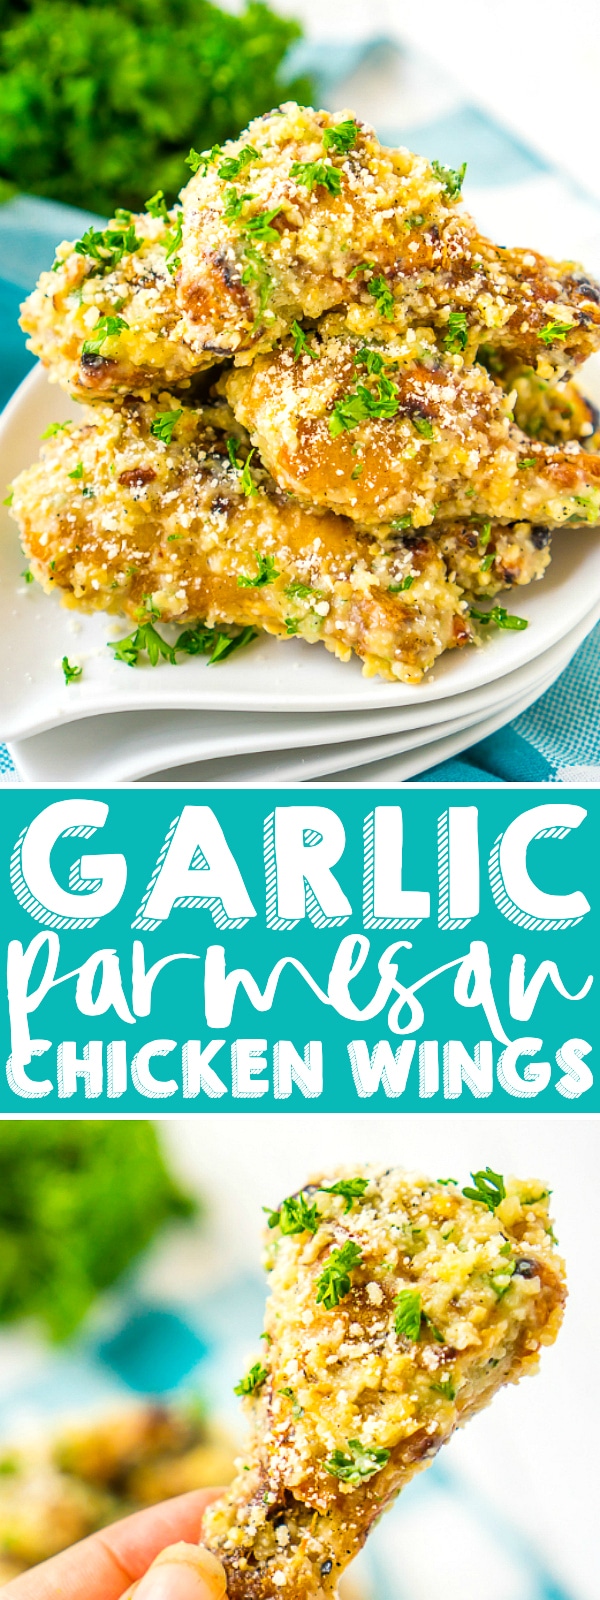 Garlic and parmesan is a perfect pairing! And this Garlic Parmesan Chicken Wings Sauce is the perfect recipe for your next bbq grill out or game day party! | THE LOVE NERDS #chickenwingsaucerecipe #chickenwings #grilledchickenwings #bakedchickenwings